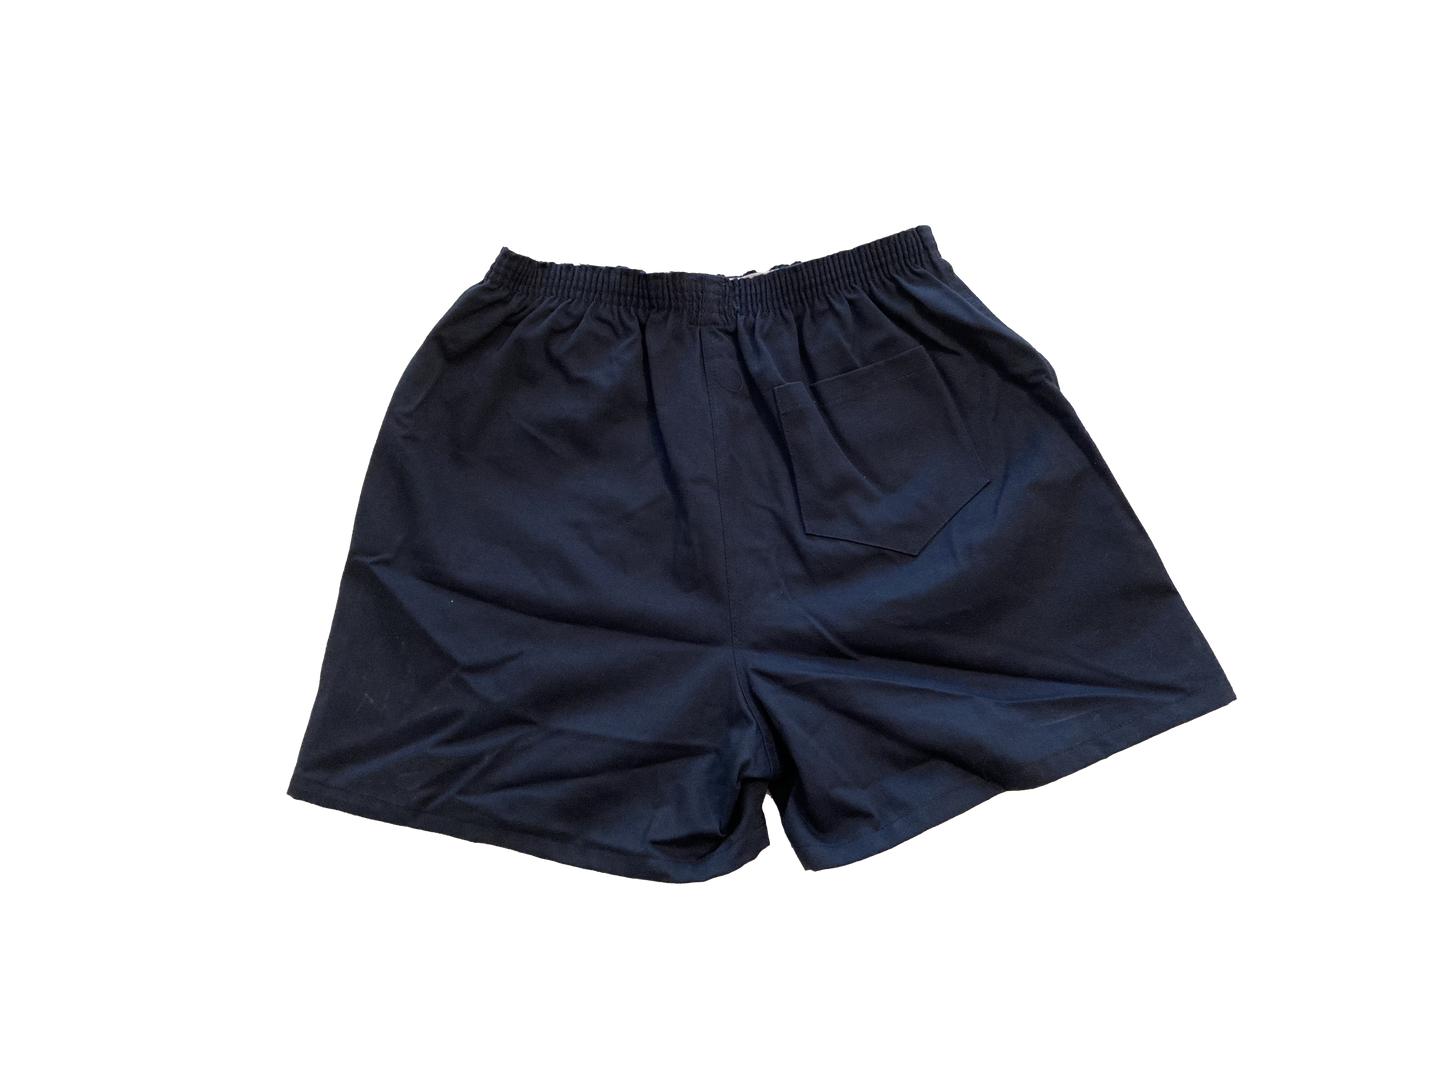 80's Inspired Camp River Shorts